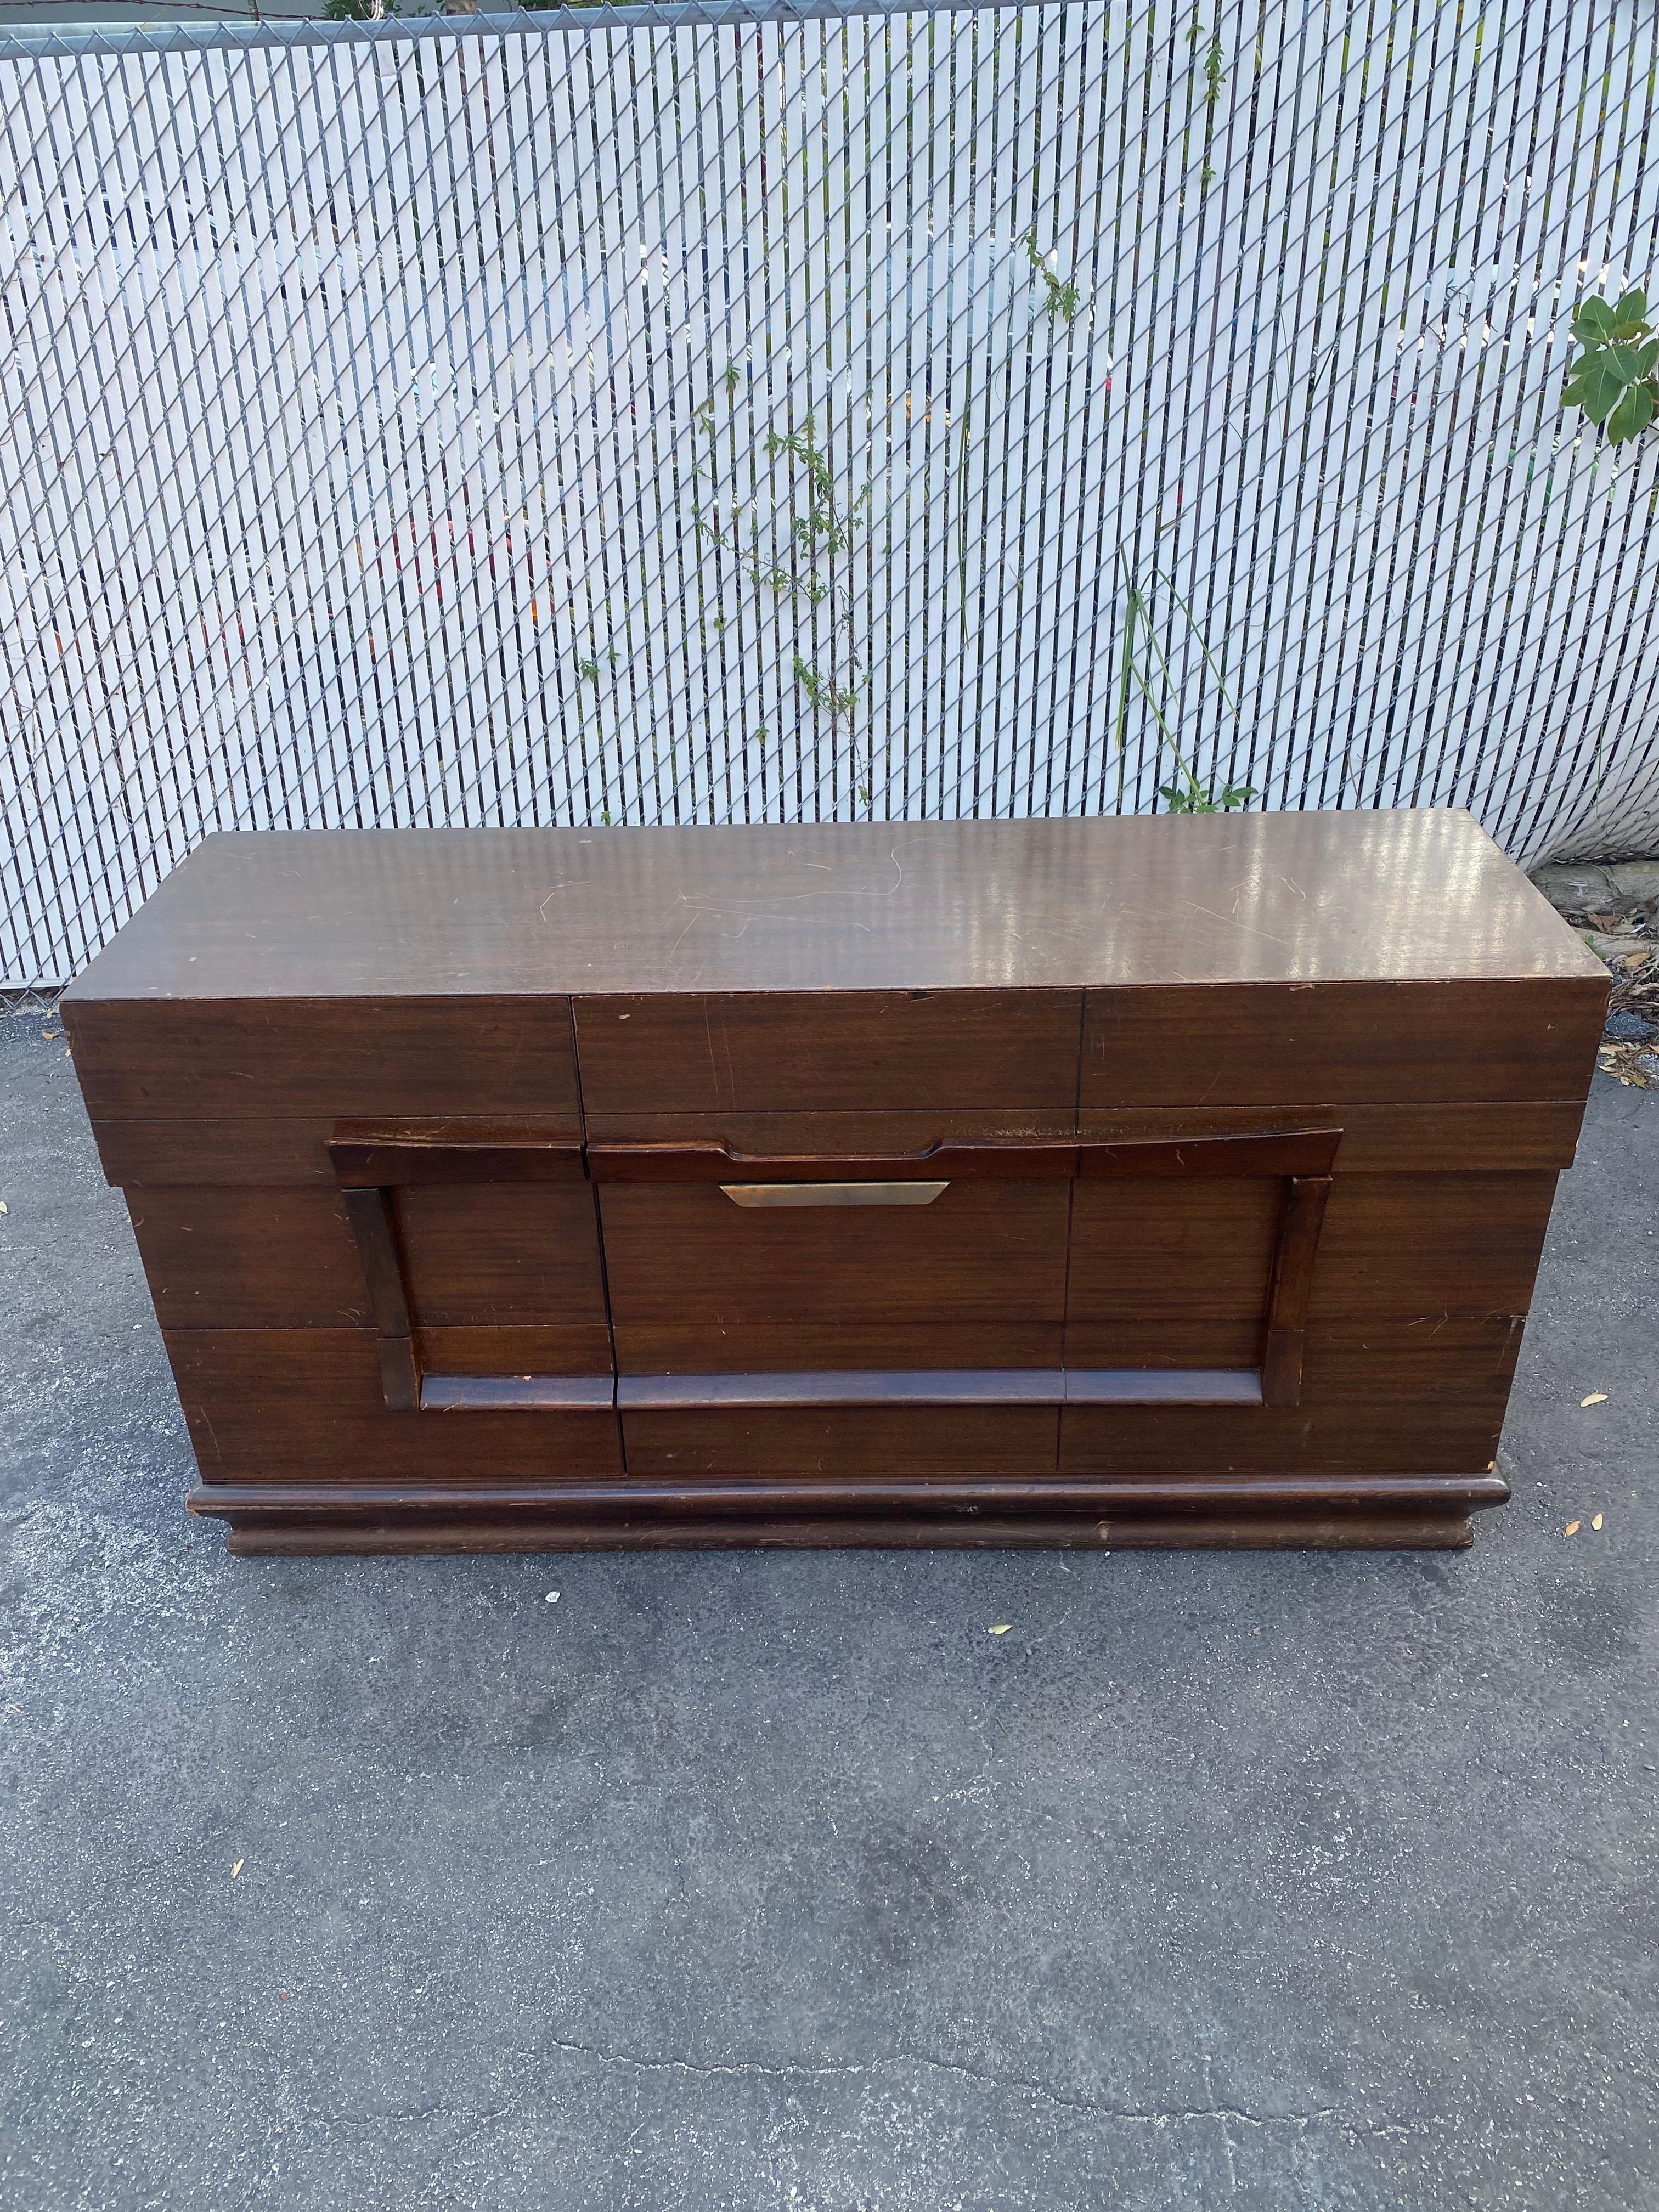 On offer on this occasion is one of the most stunning, dresser or storage cabinet you could hope to find. This is an ultra-rare opportunity to acquire what is, unequivocally, the best of the best, it being a most spectacular and